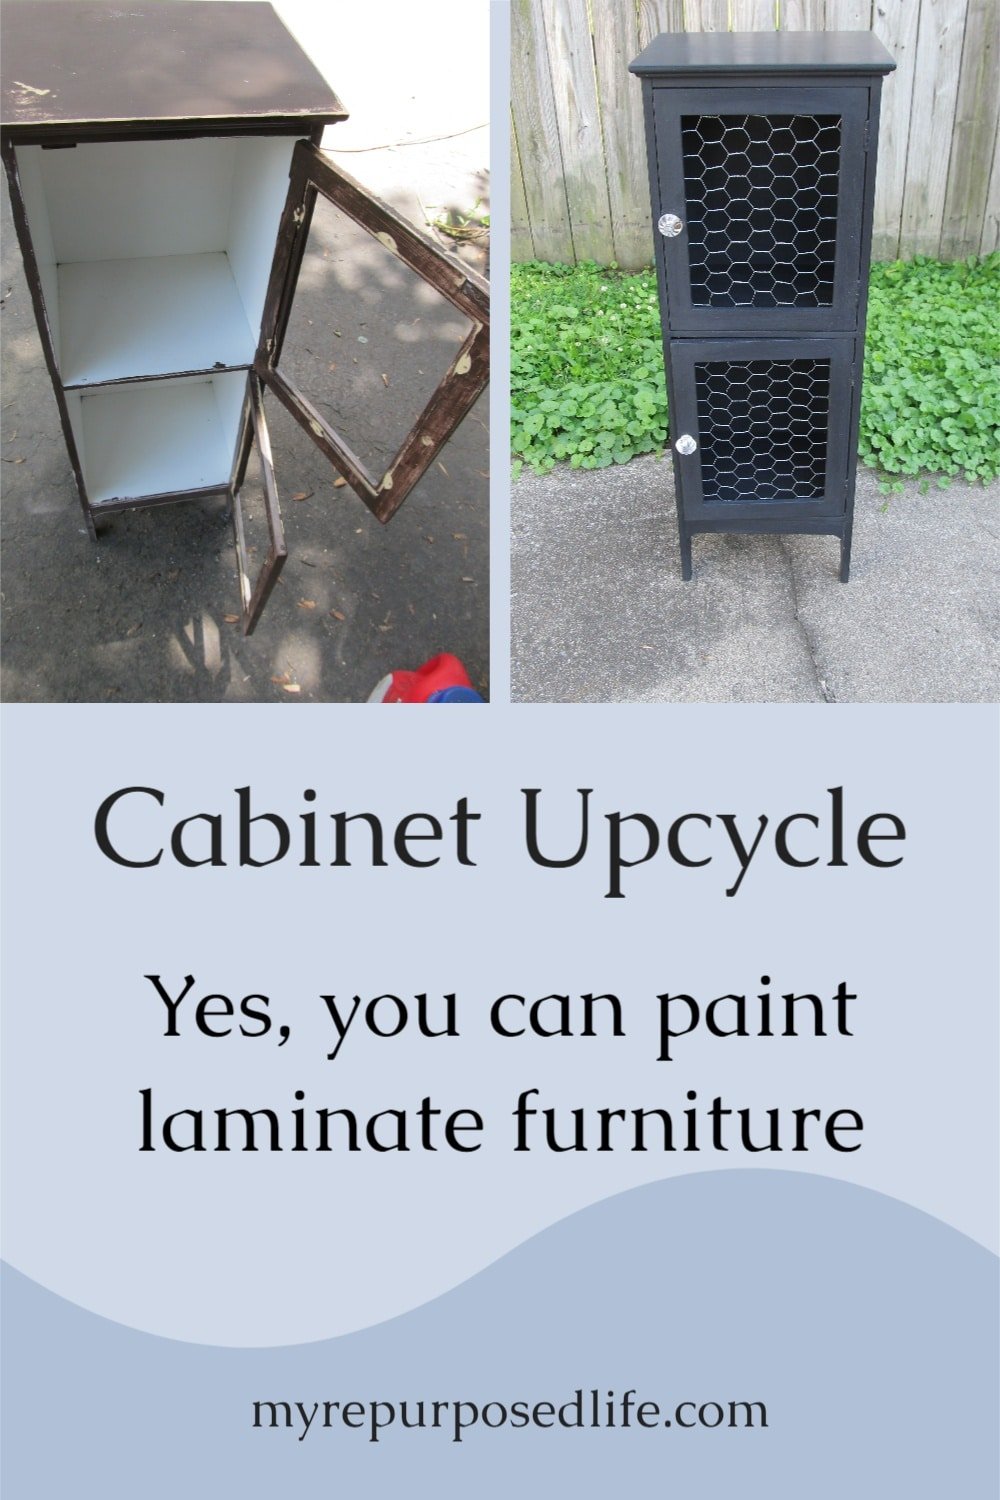 Someone tried to rescue this laminate cabinet, but they didn't know the tricks of the trade! A very inexpensive makeover using paint and chicken wire you may already have on hand. #MyRepurposedLife #repurposed #furniture #makeover #laminate #cabinet via @repurposedlife